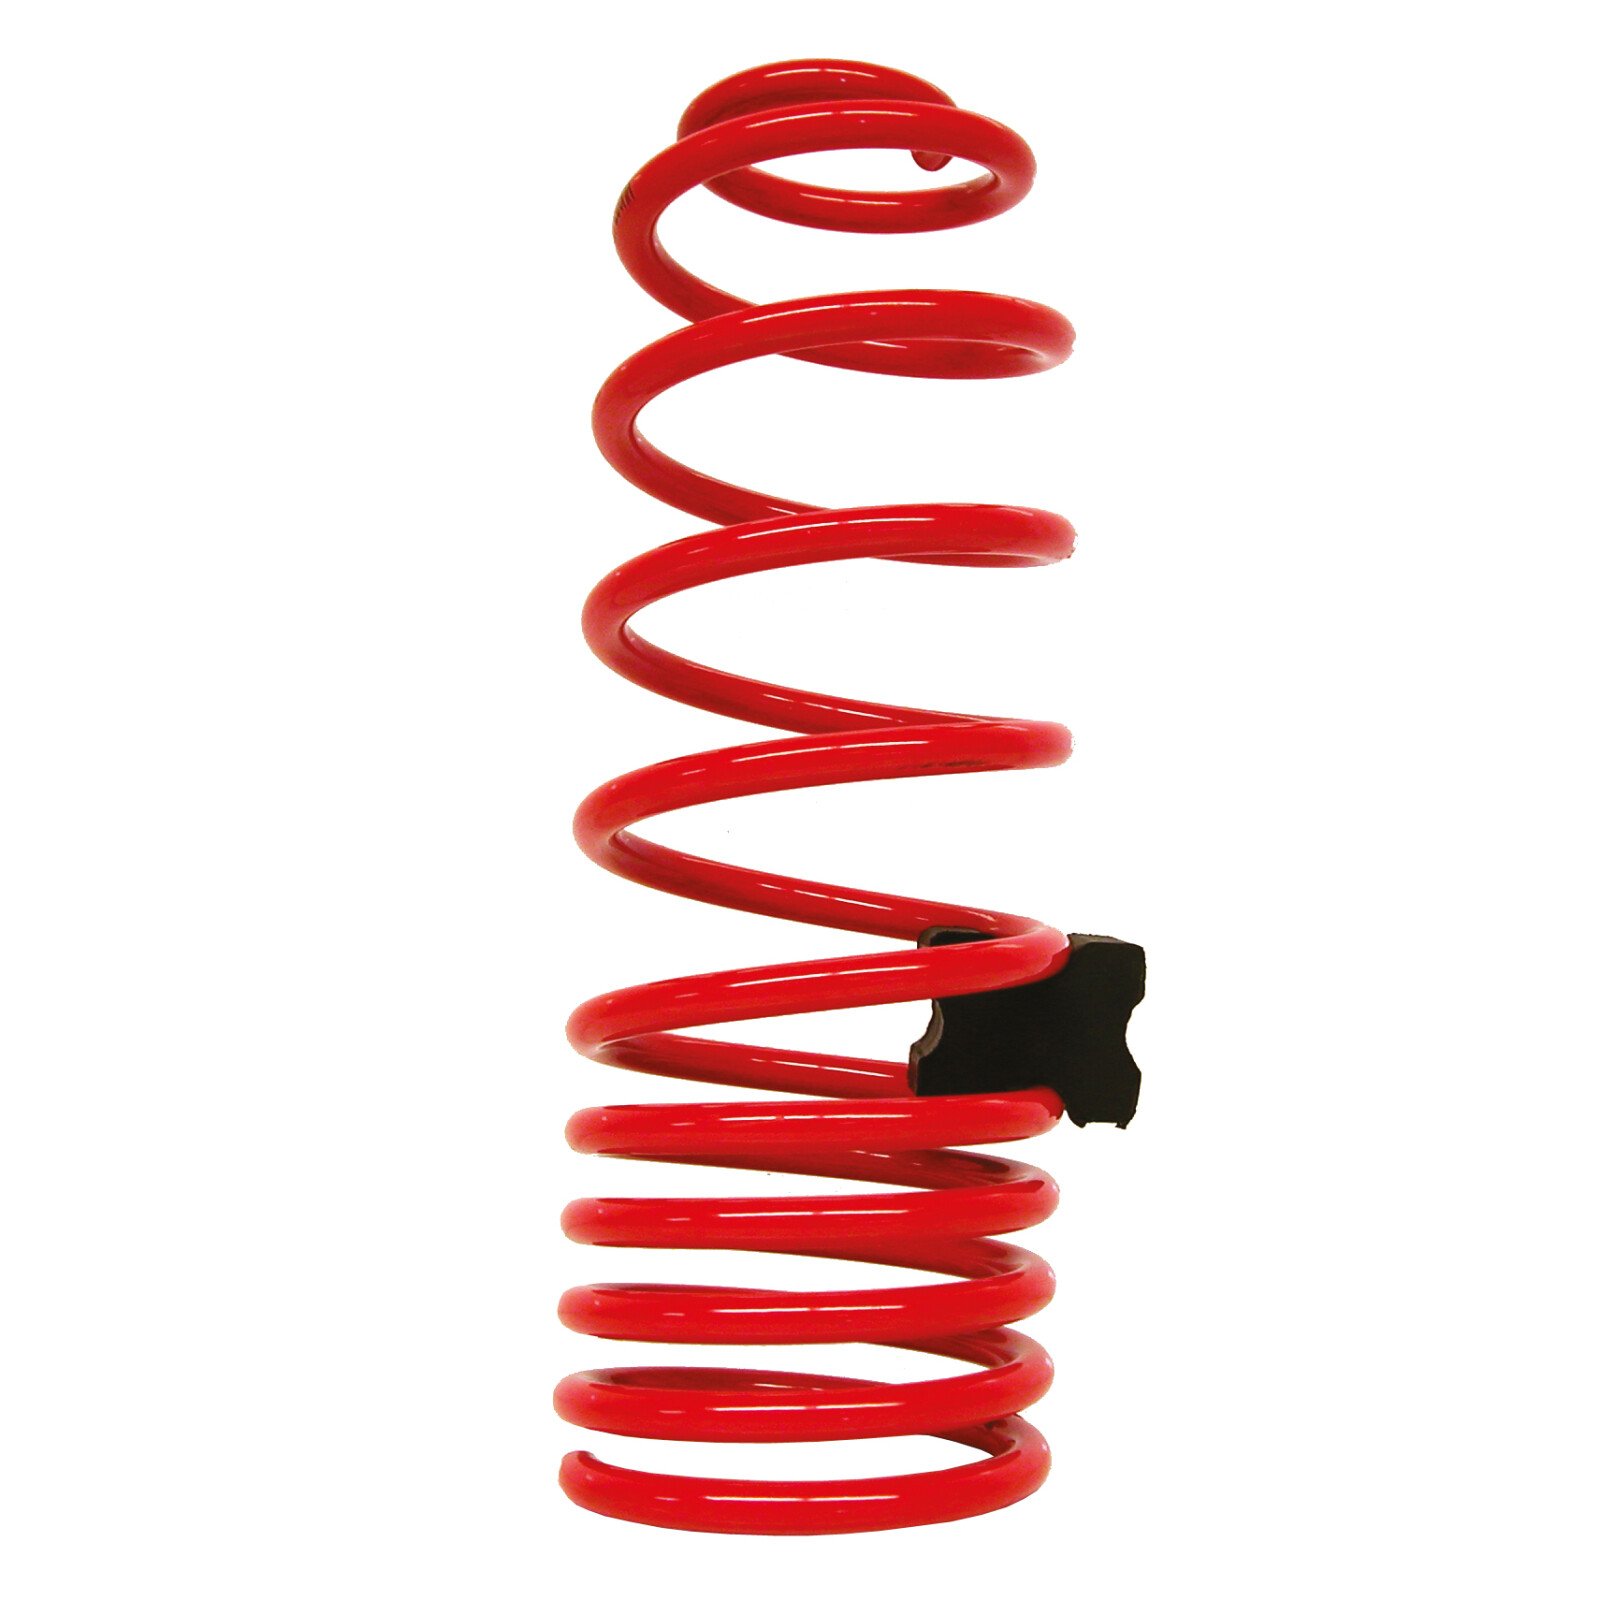 Spacers wound spring suspension - Resealed thumb